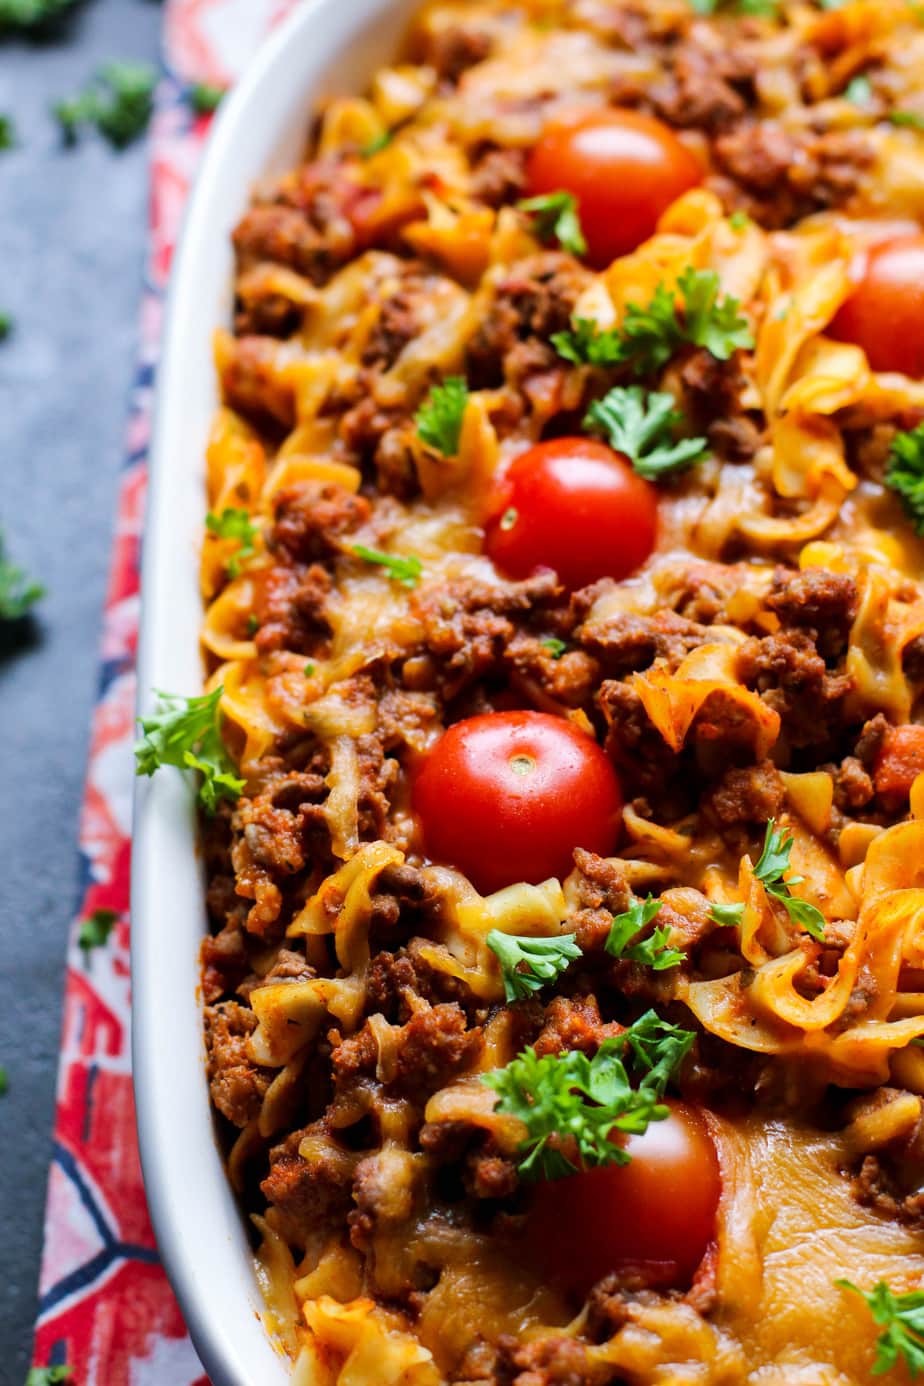 Rustic Puerto Rican Beef and Sausage Pasta Bake in a pan garnished with cilantro